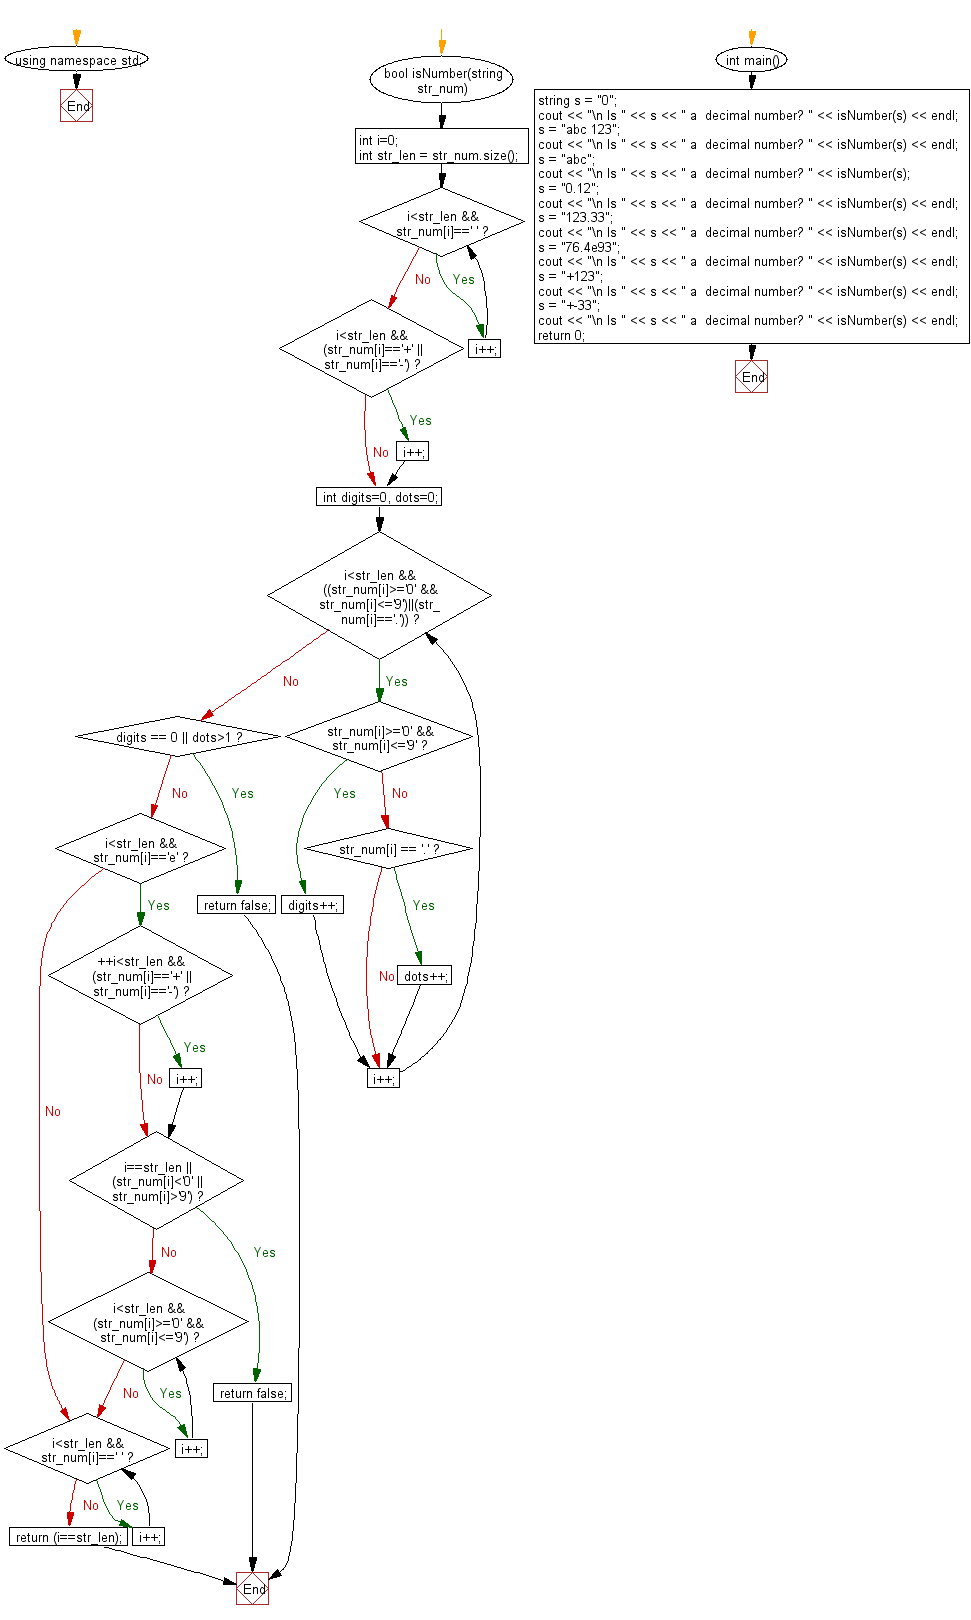 Flowchart: Check if a given string is a decimal number or not